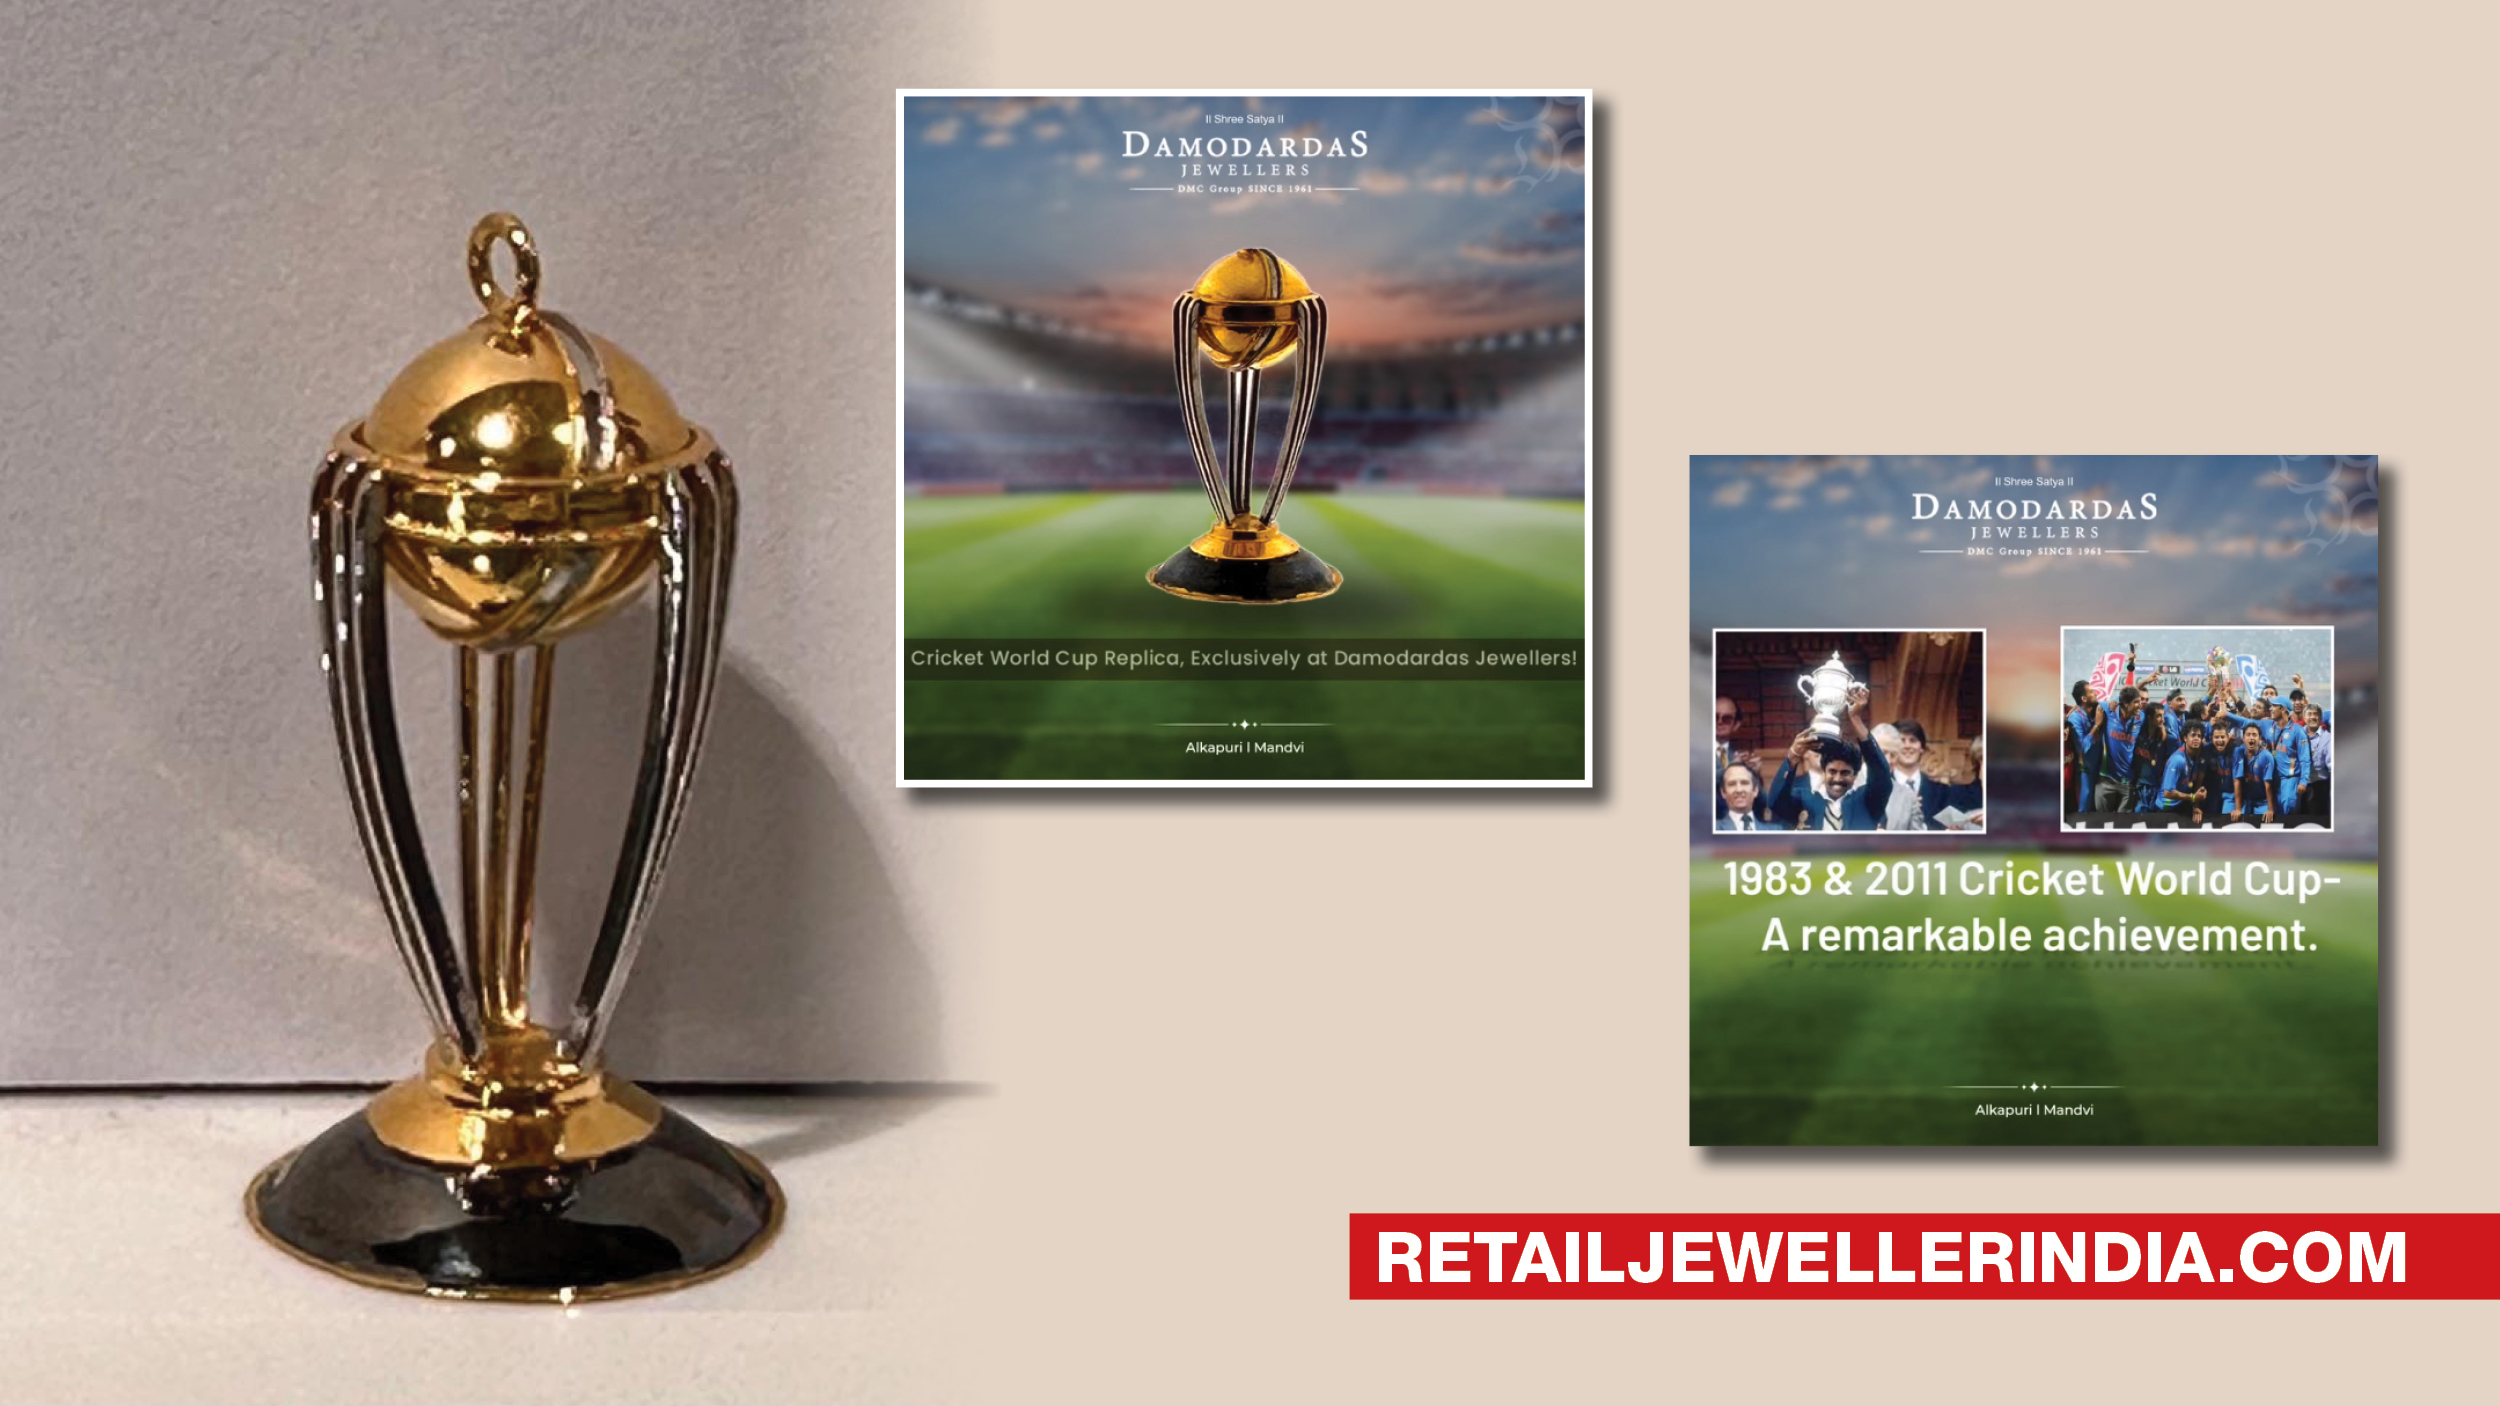 Ahmedabad Jeweller Crafts Mini ICC World Cup Trophy in Gold, Hopes